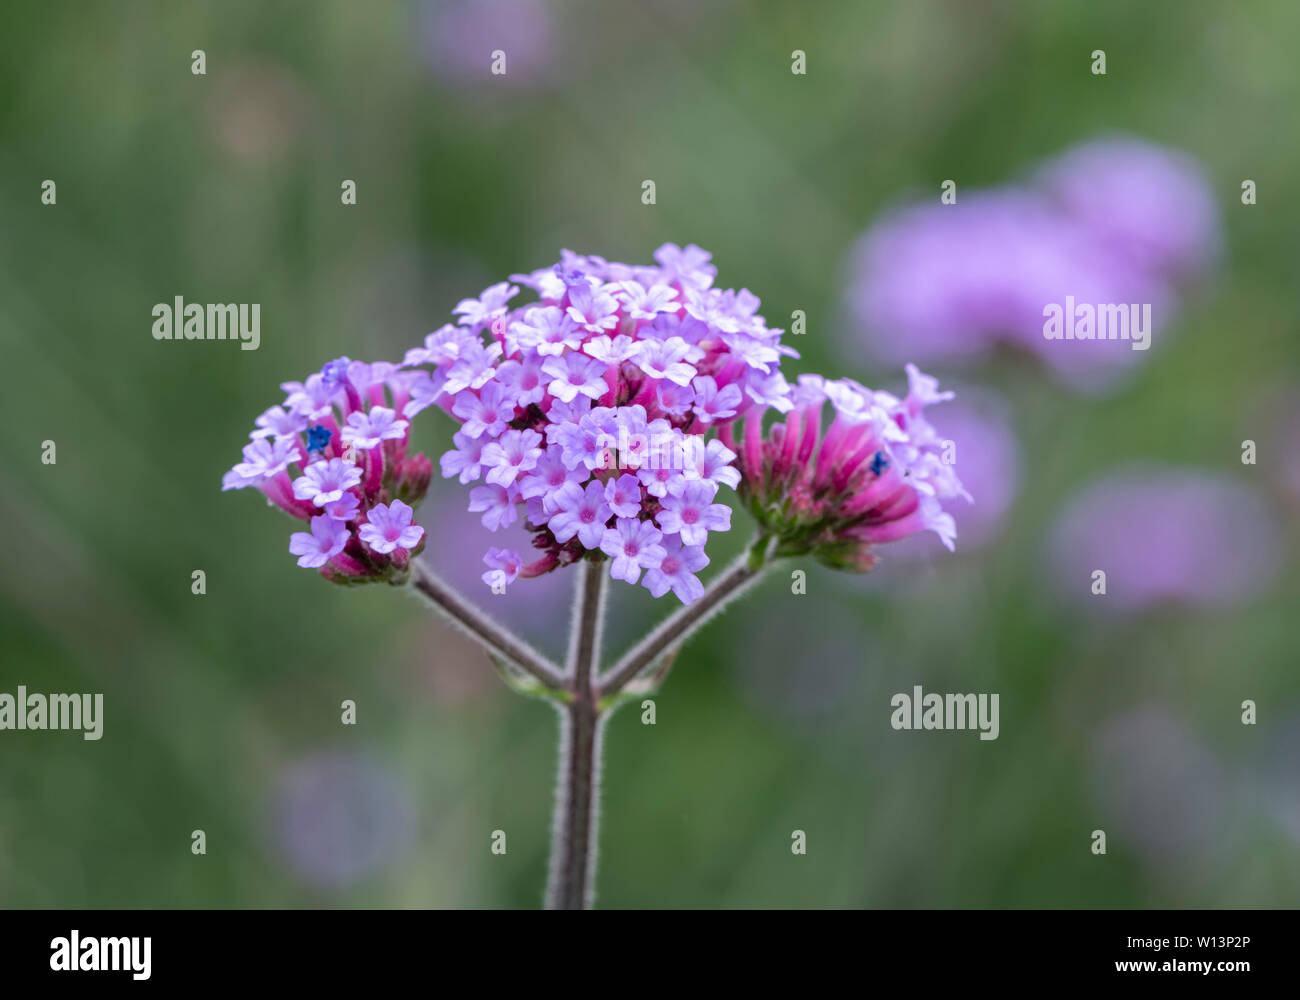 Mauve Verbena flower in full bloom, Verbena is very attractive to bees and butterflies Stock Photo